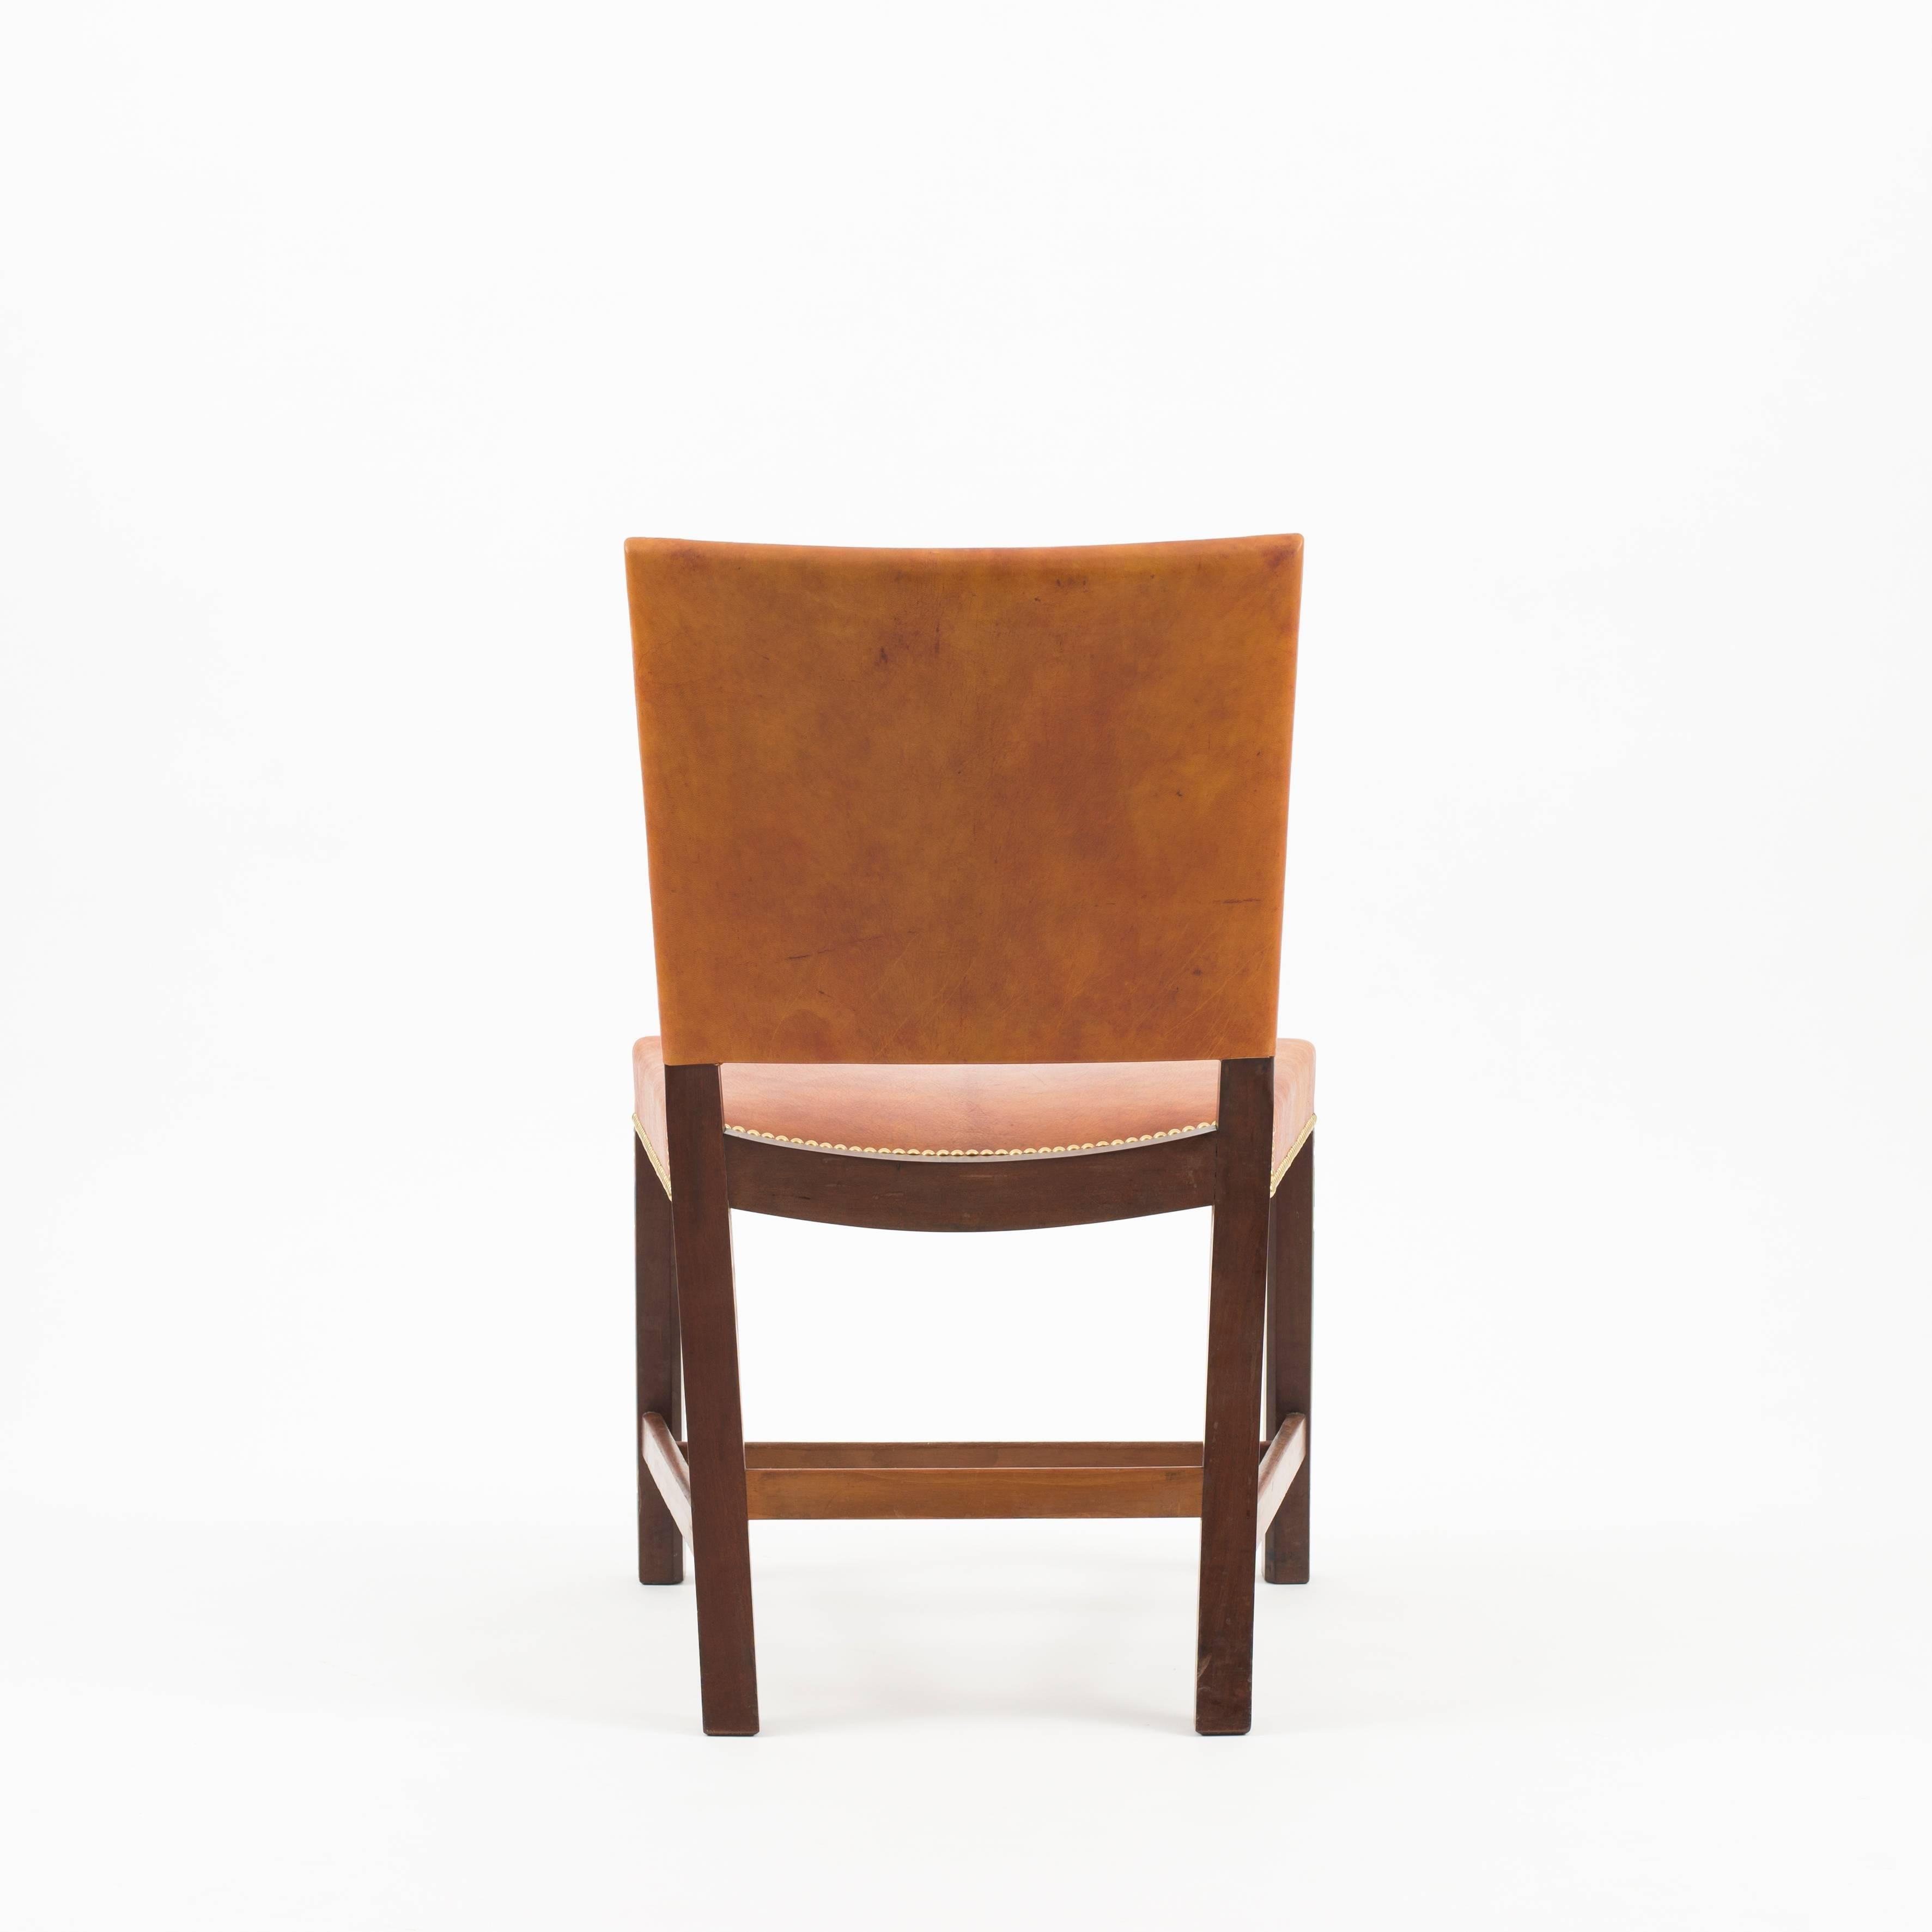 Polished Kaare Klint Red Chair in Cuban Mahogany and Niger Leather, 1928